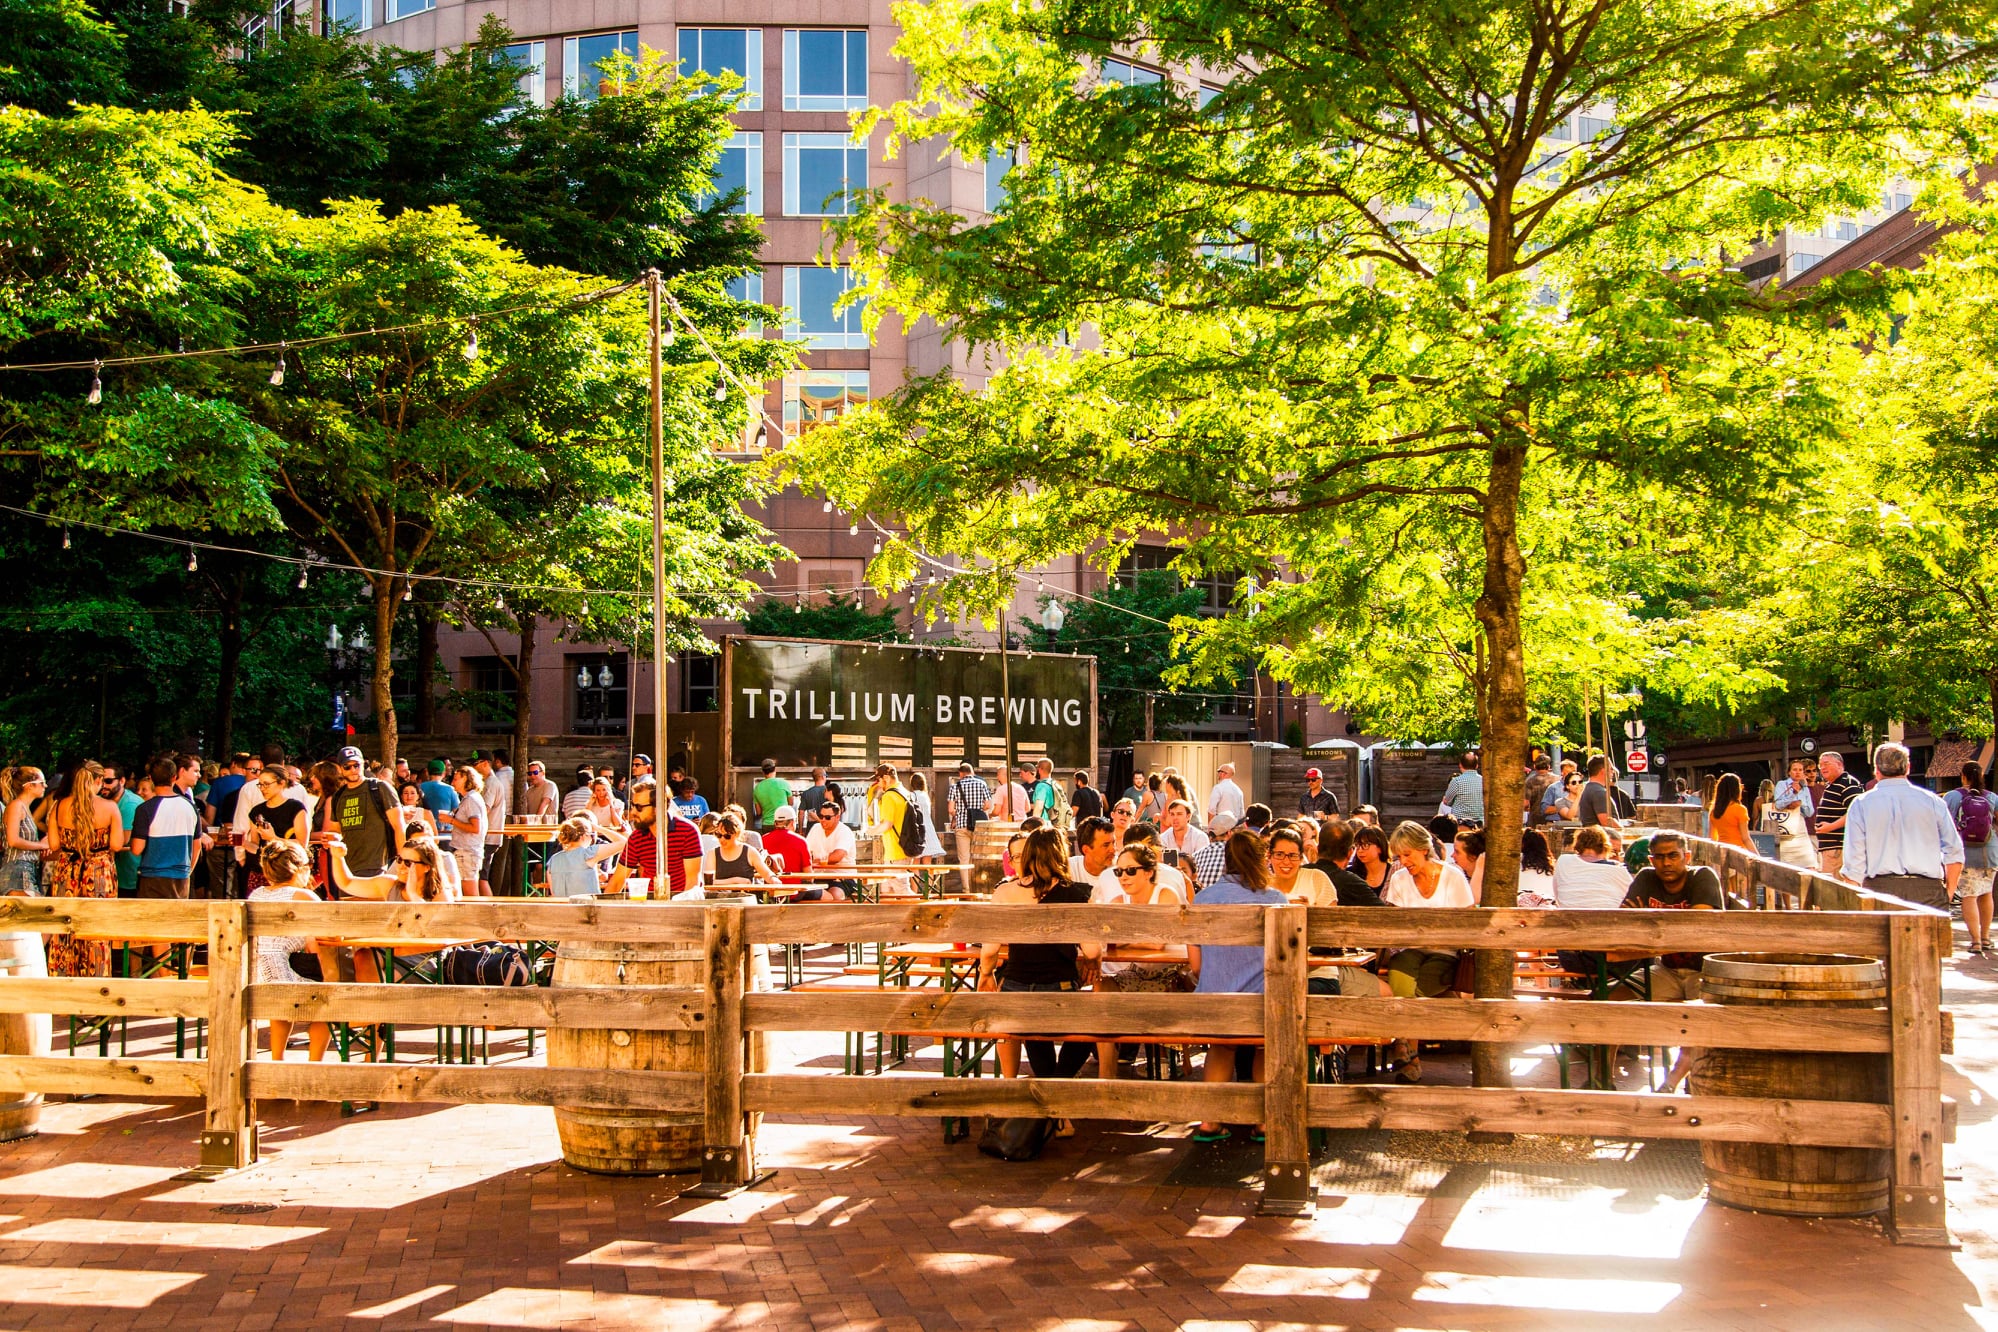 Trillium’s beer garden on Greenway in Boston reopening Thursday